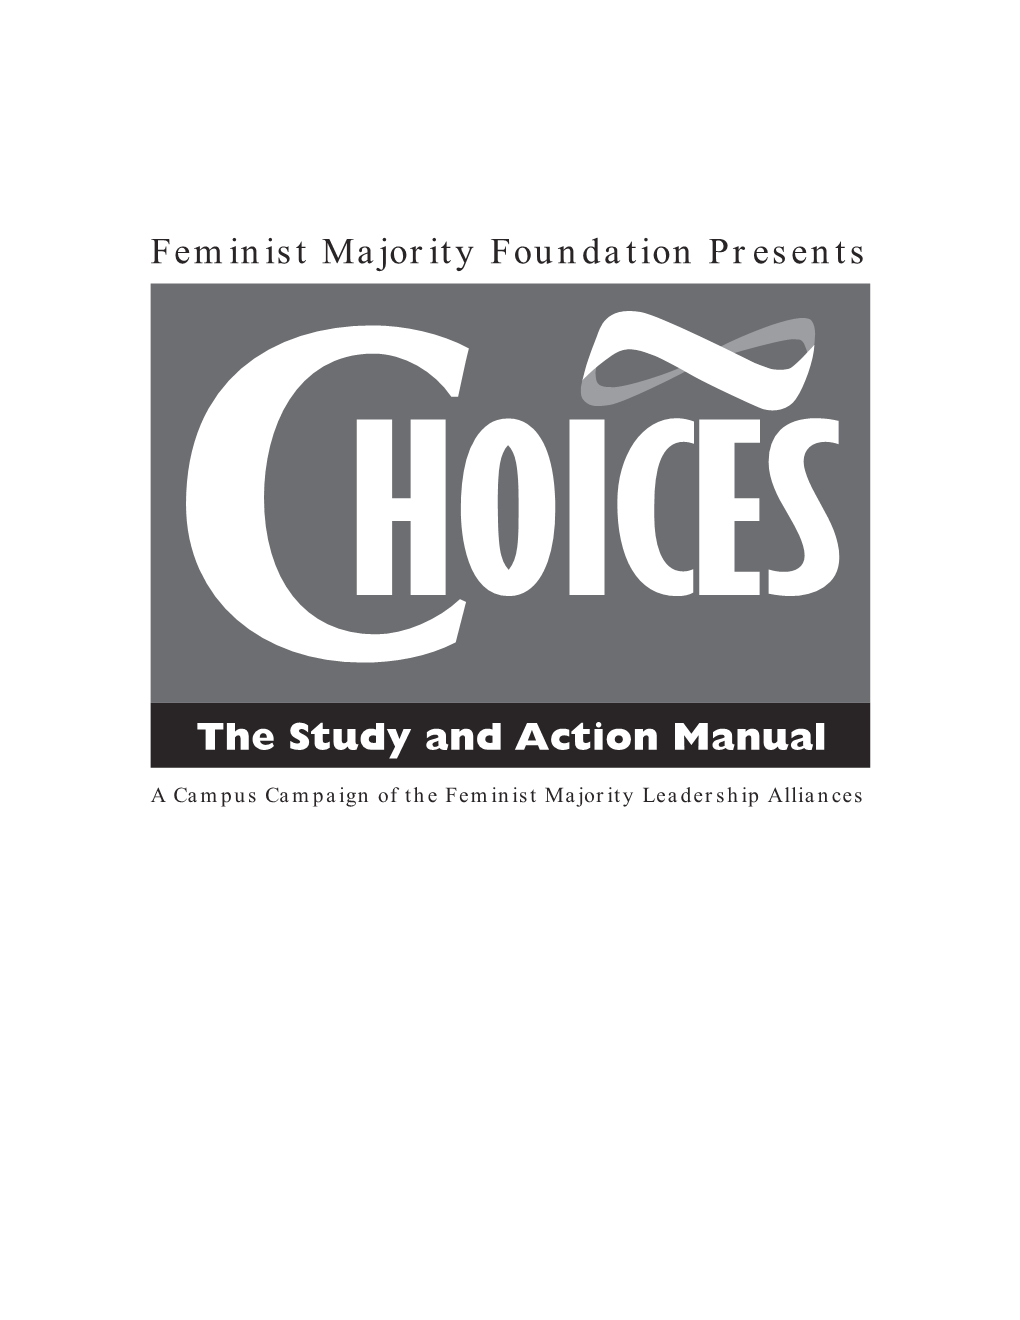 The Study and Action Manual